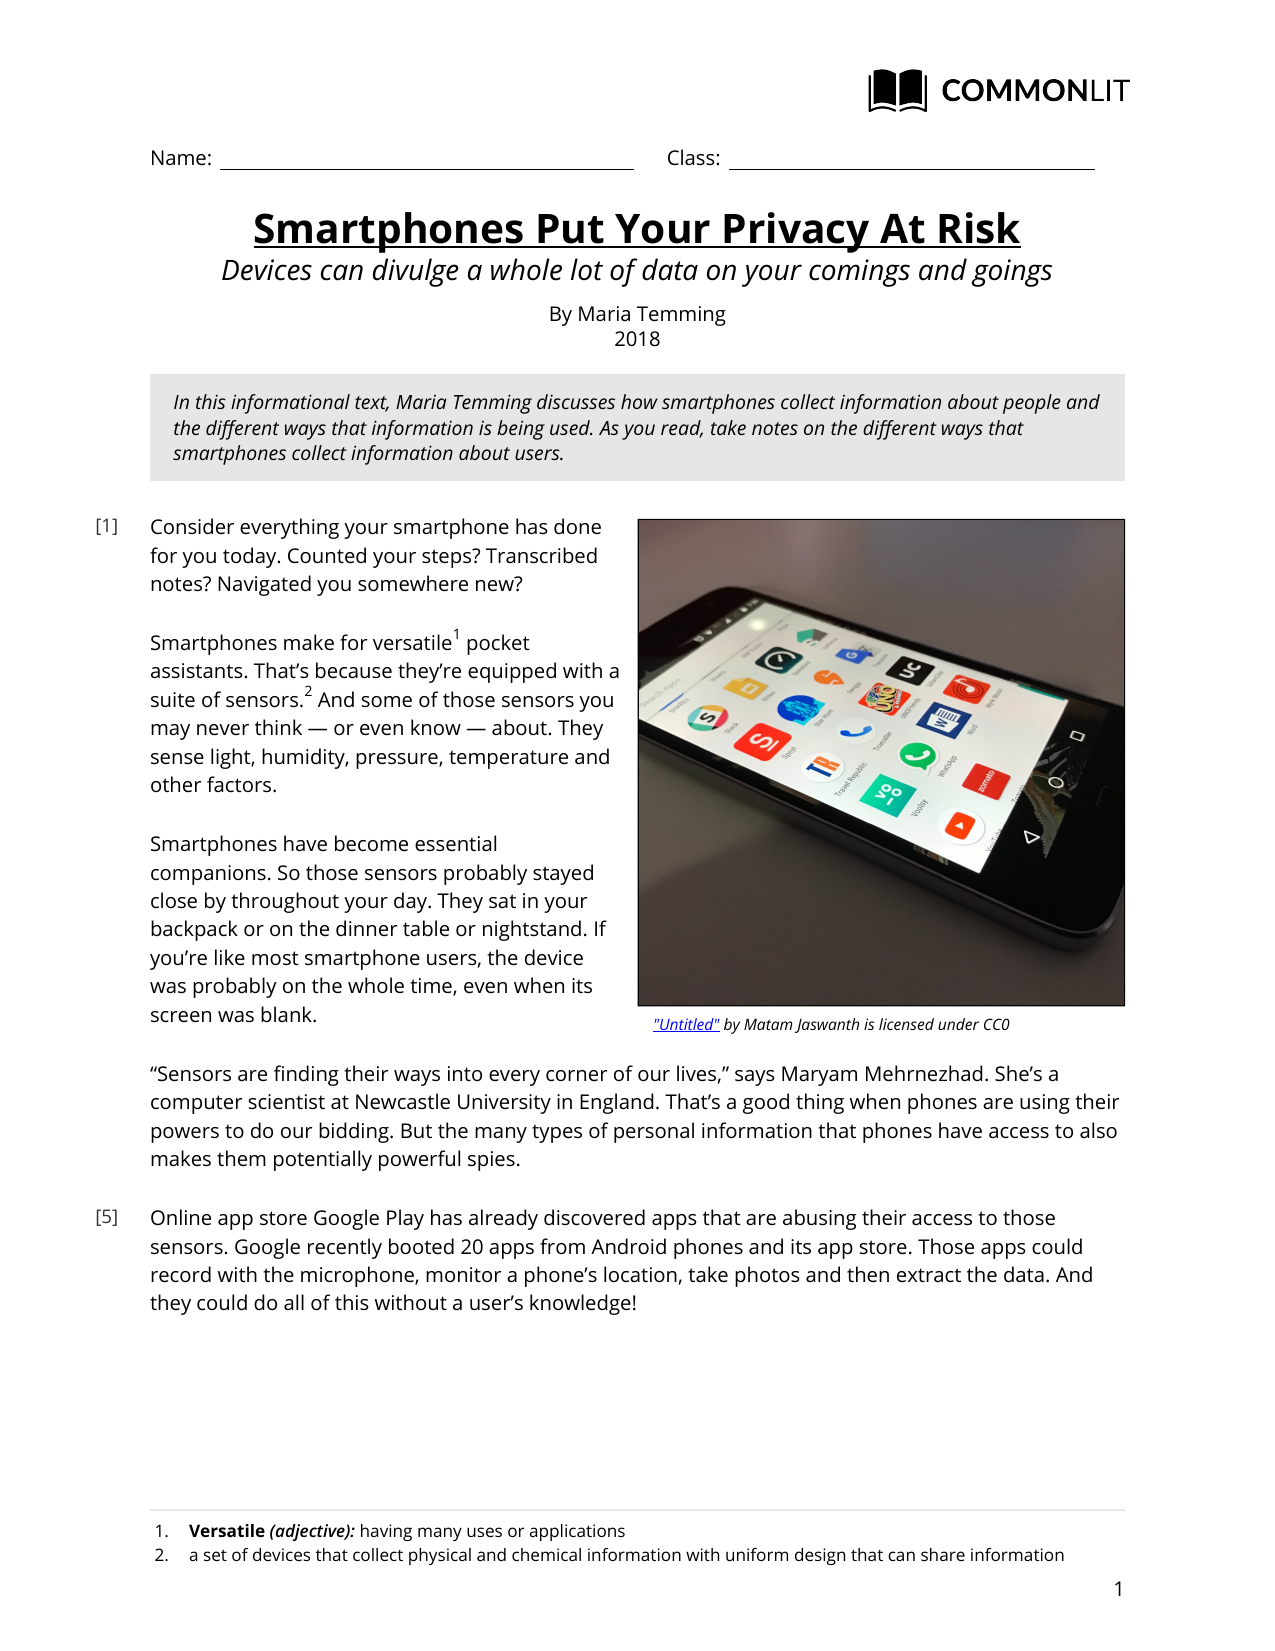 How do smartphones put your privacy at risk?